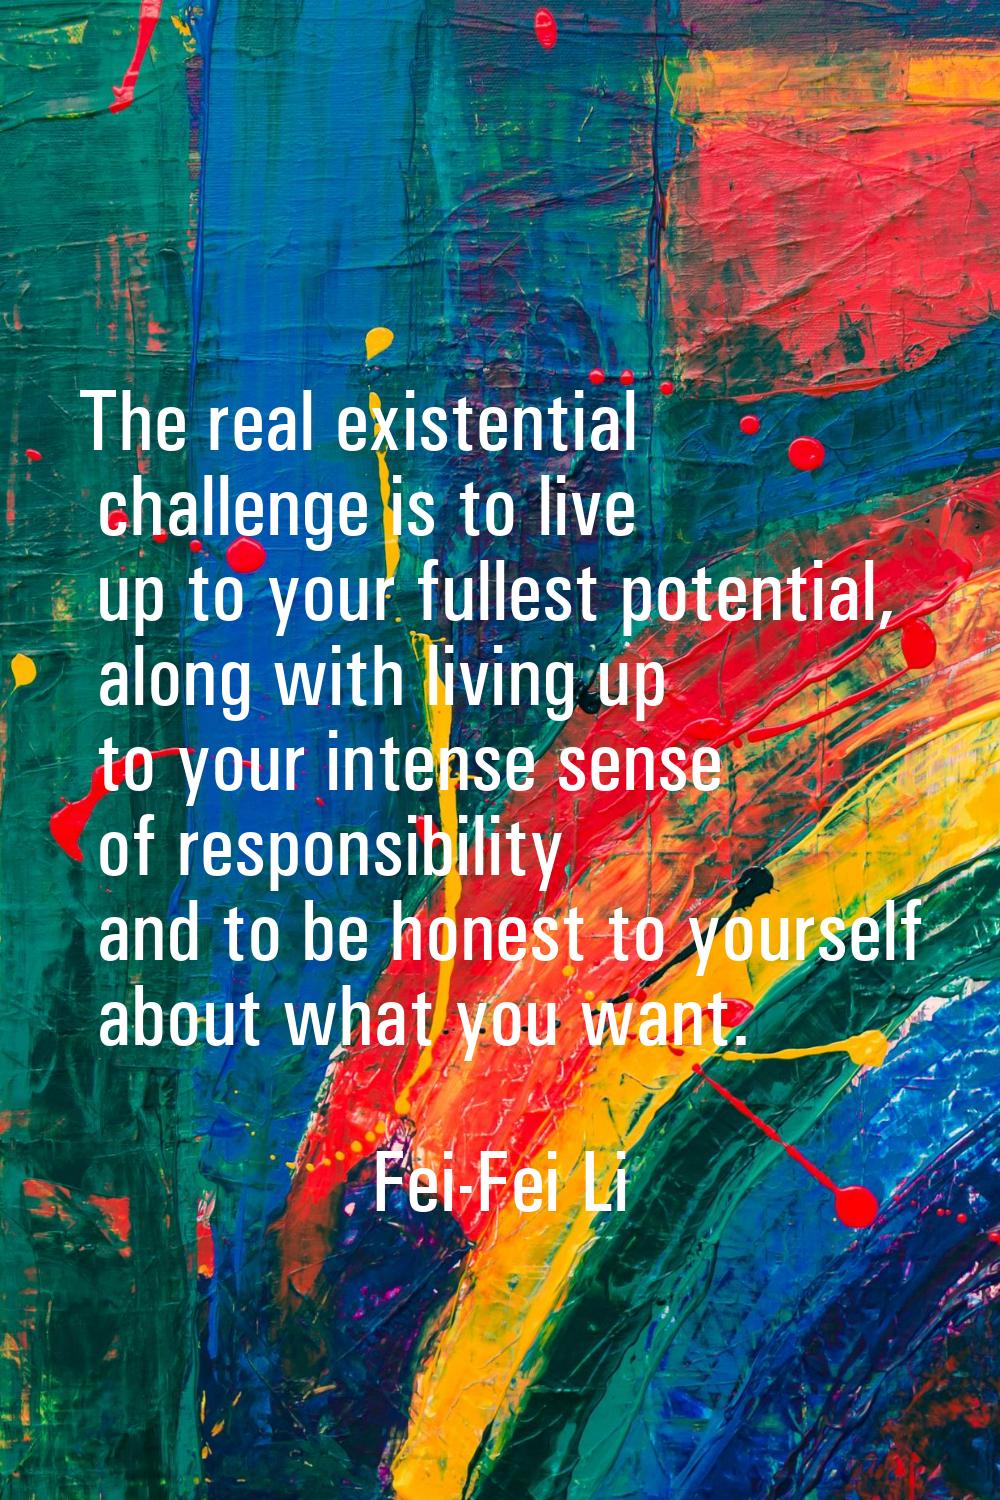 The real existential challenge is to live up to your fullest potential, along with living up to you